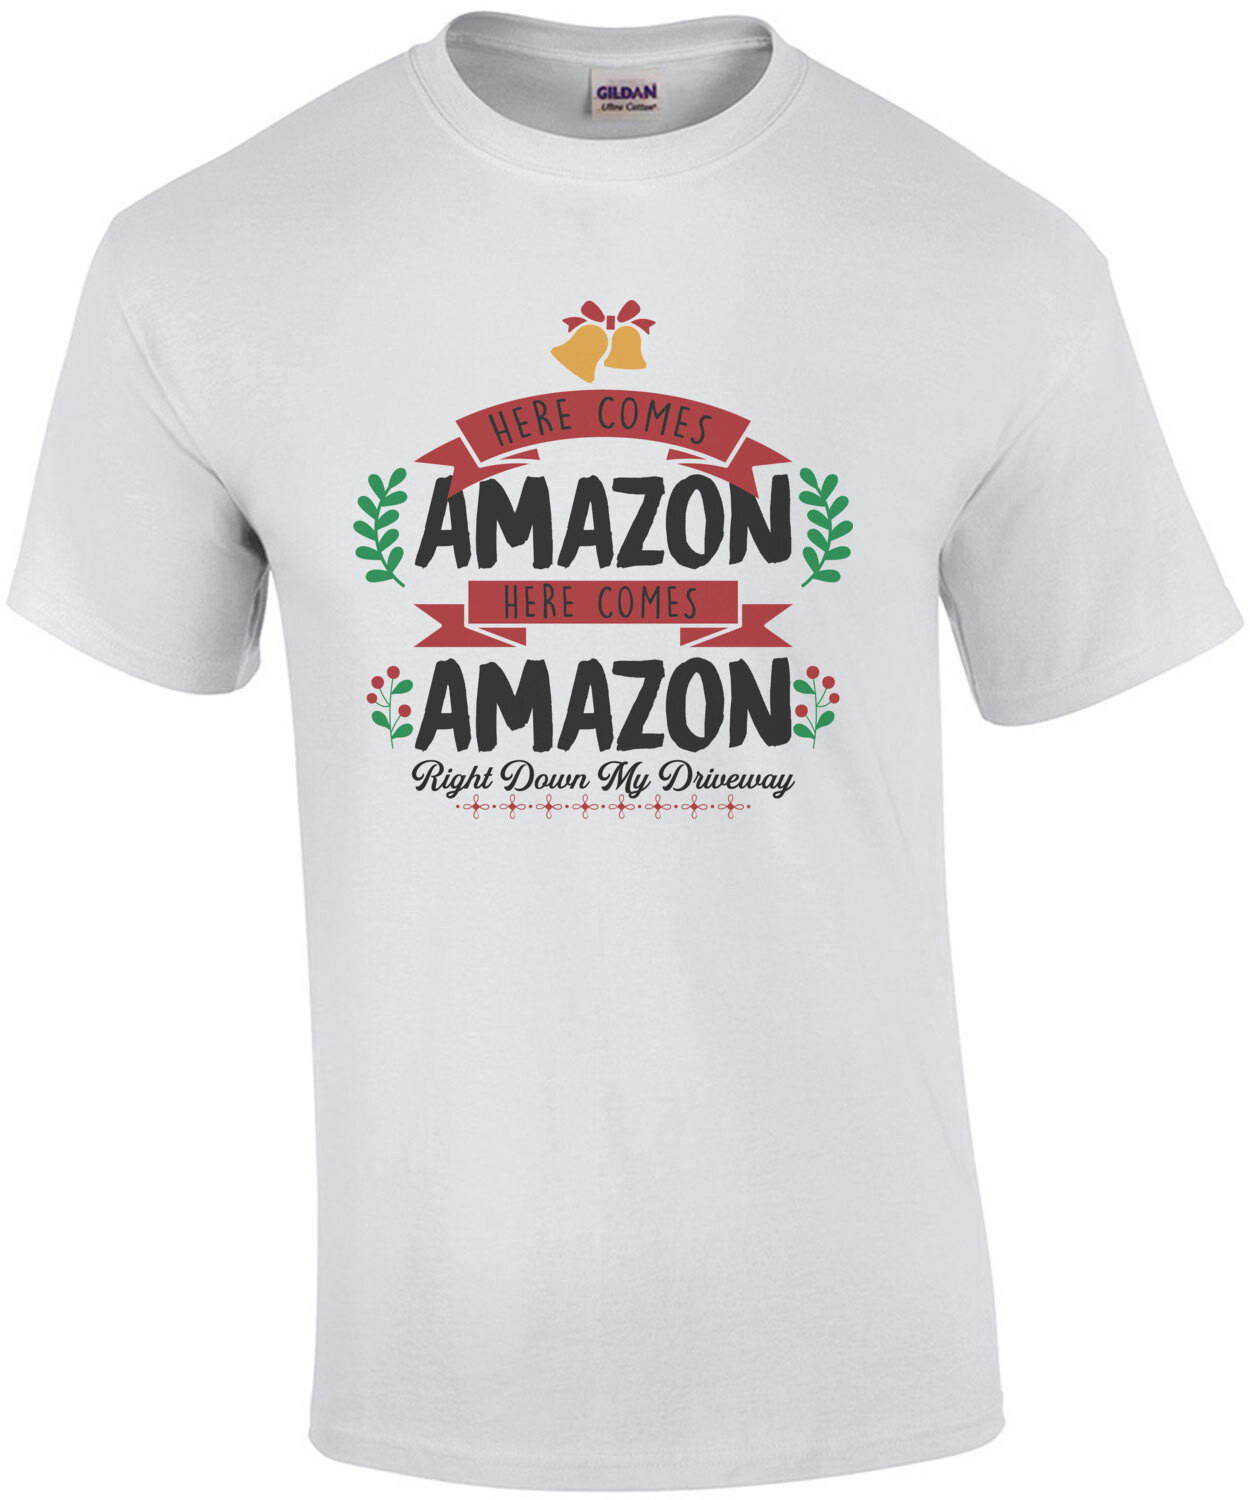 Here comes Amazon Here comes amazon - right down my driveway - funny Christmas T-Shirt